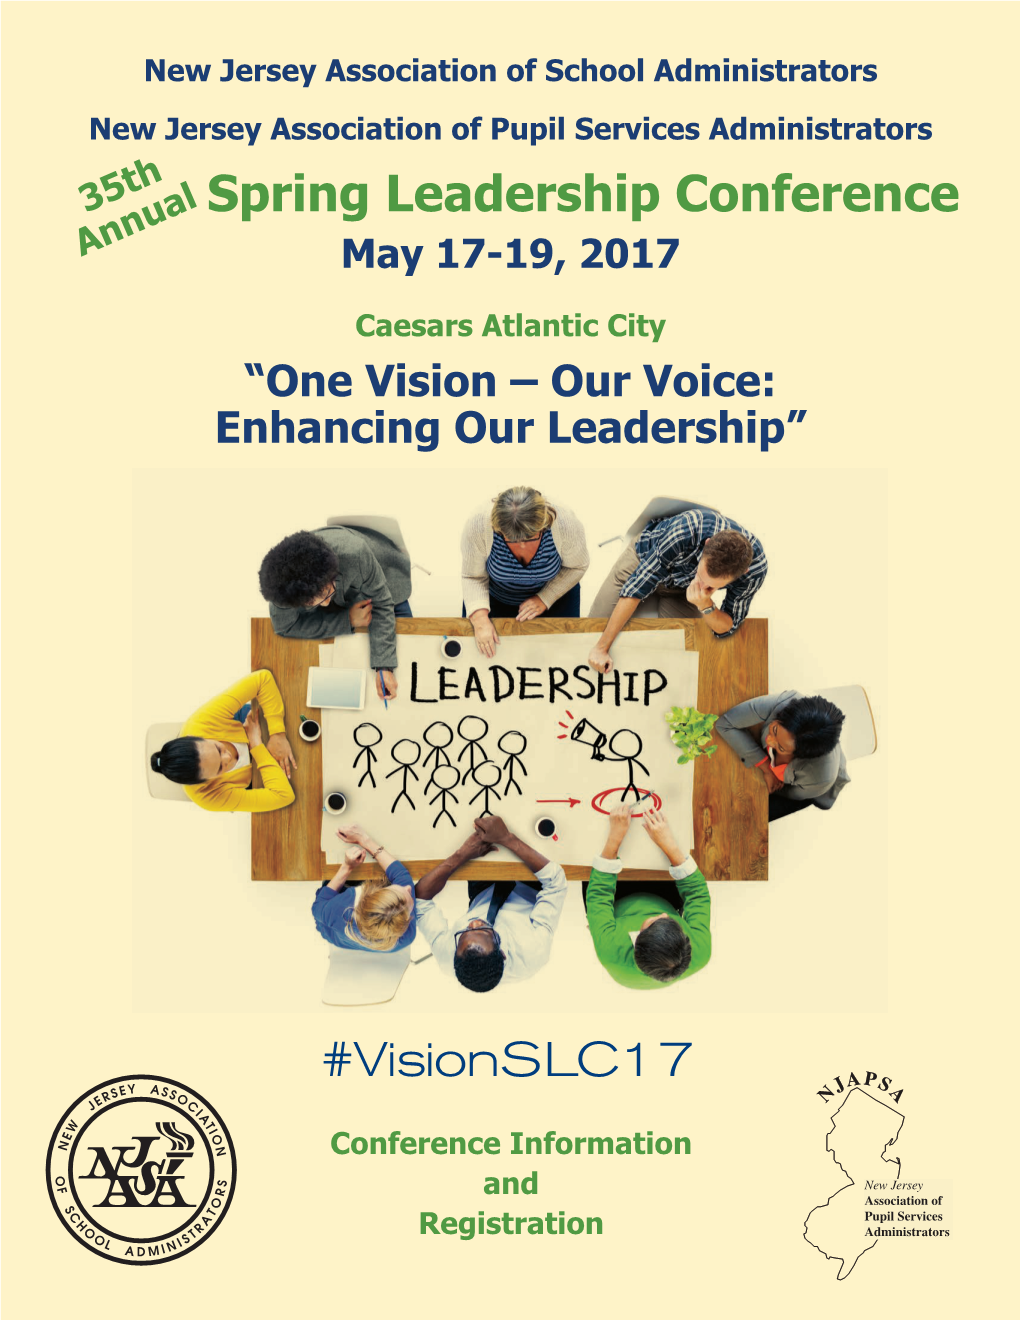 Spring Leadership Conference Annual May 17-19, 2017